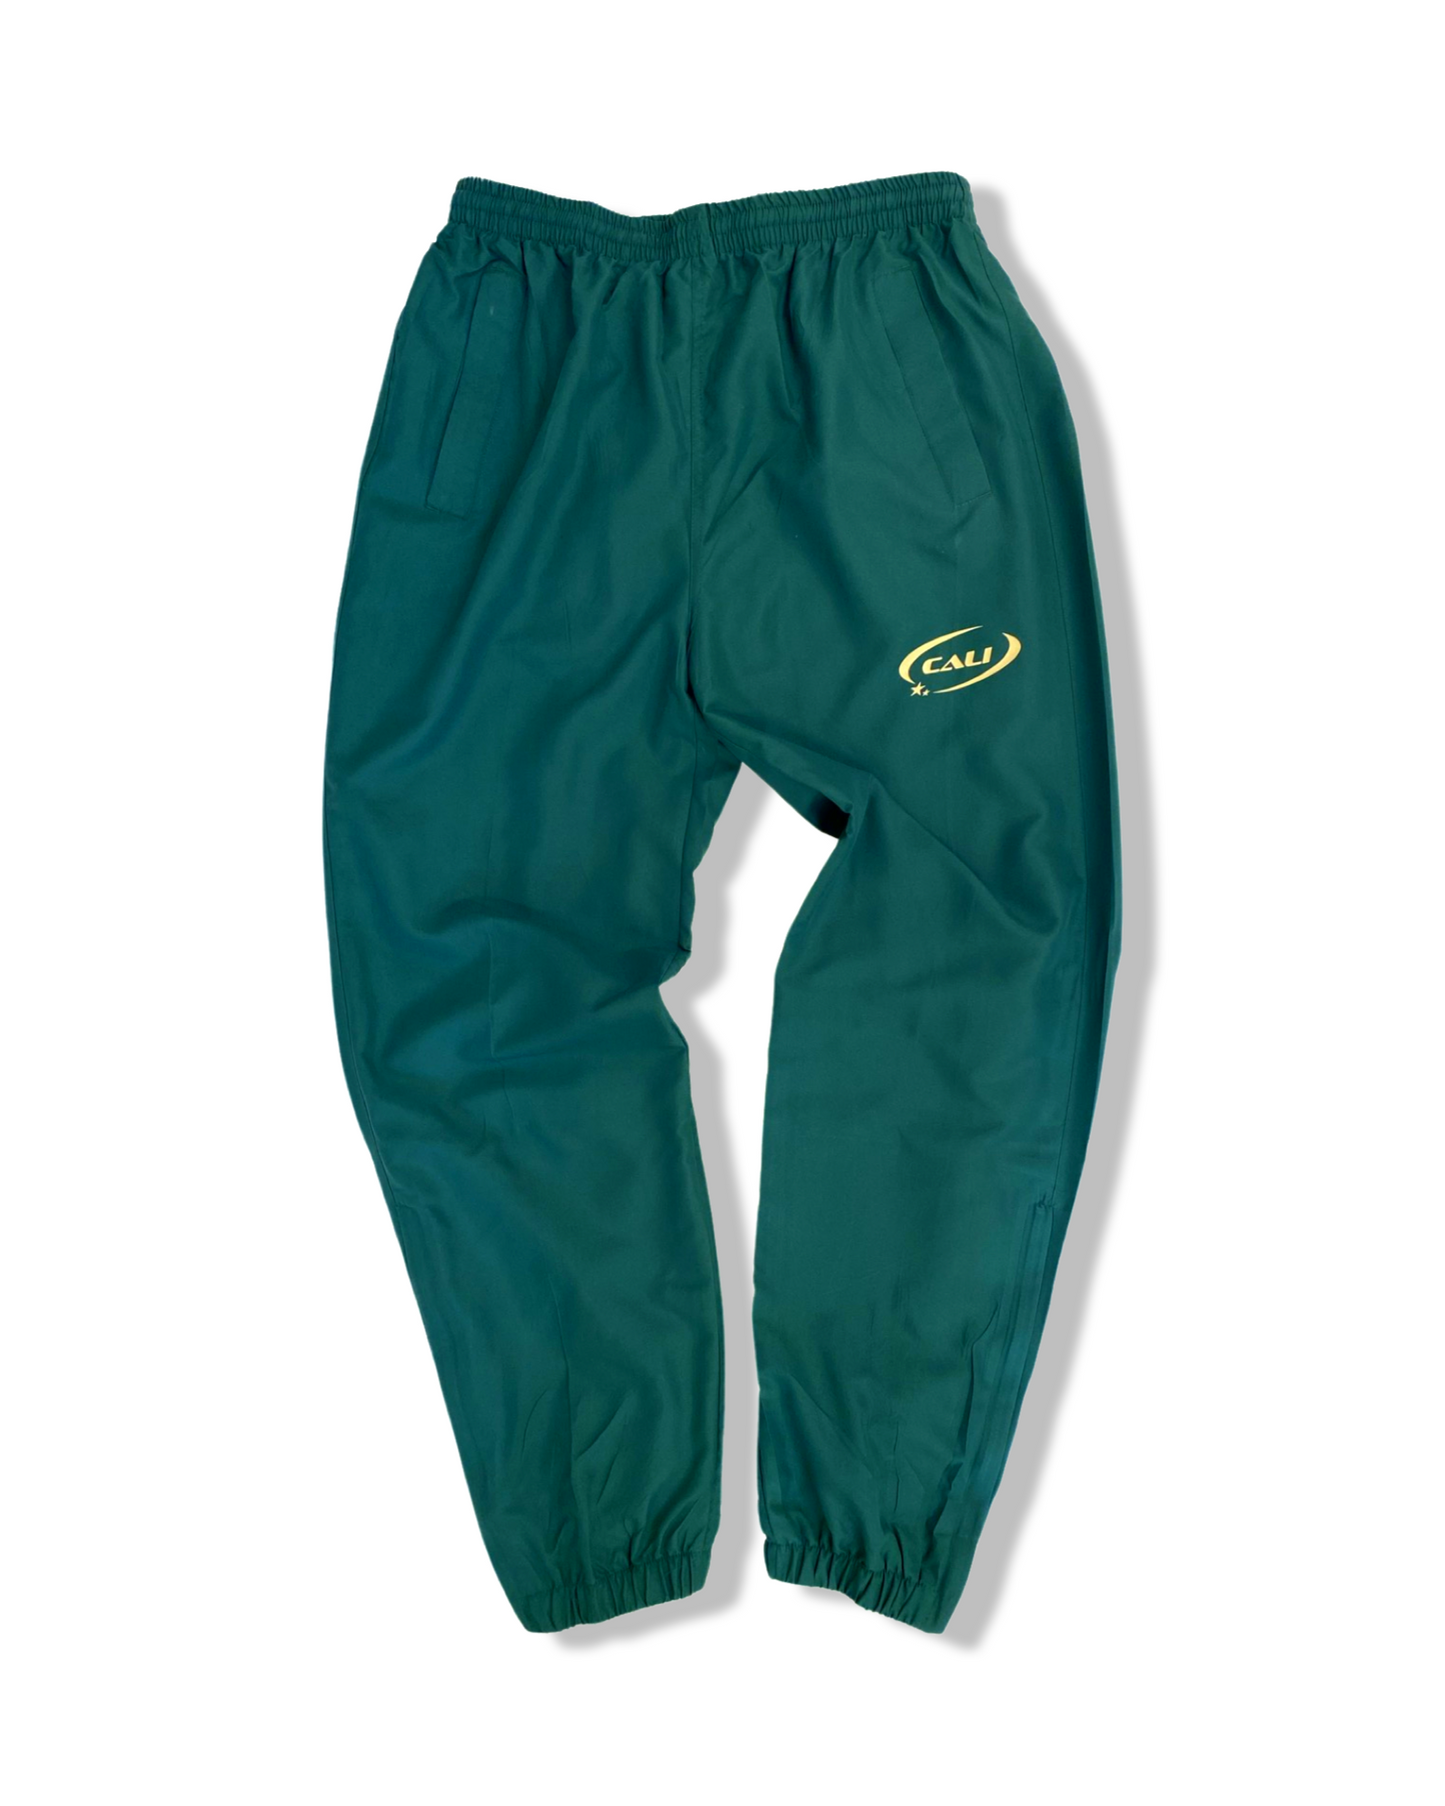 The Track Pants - Green